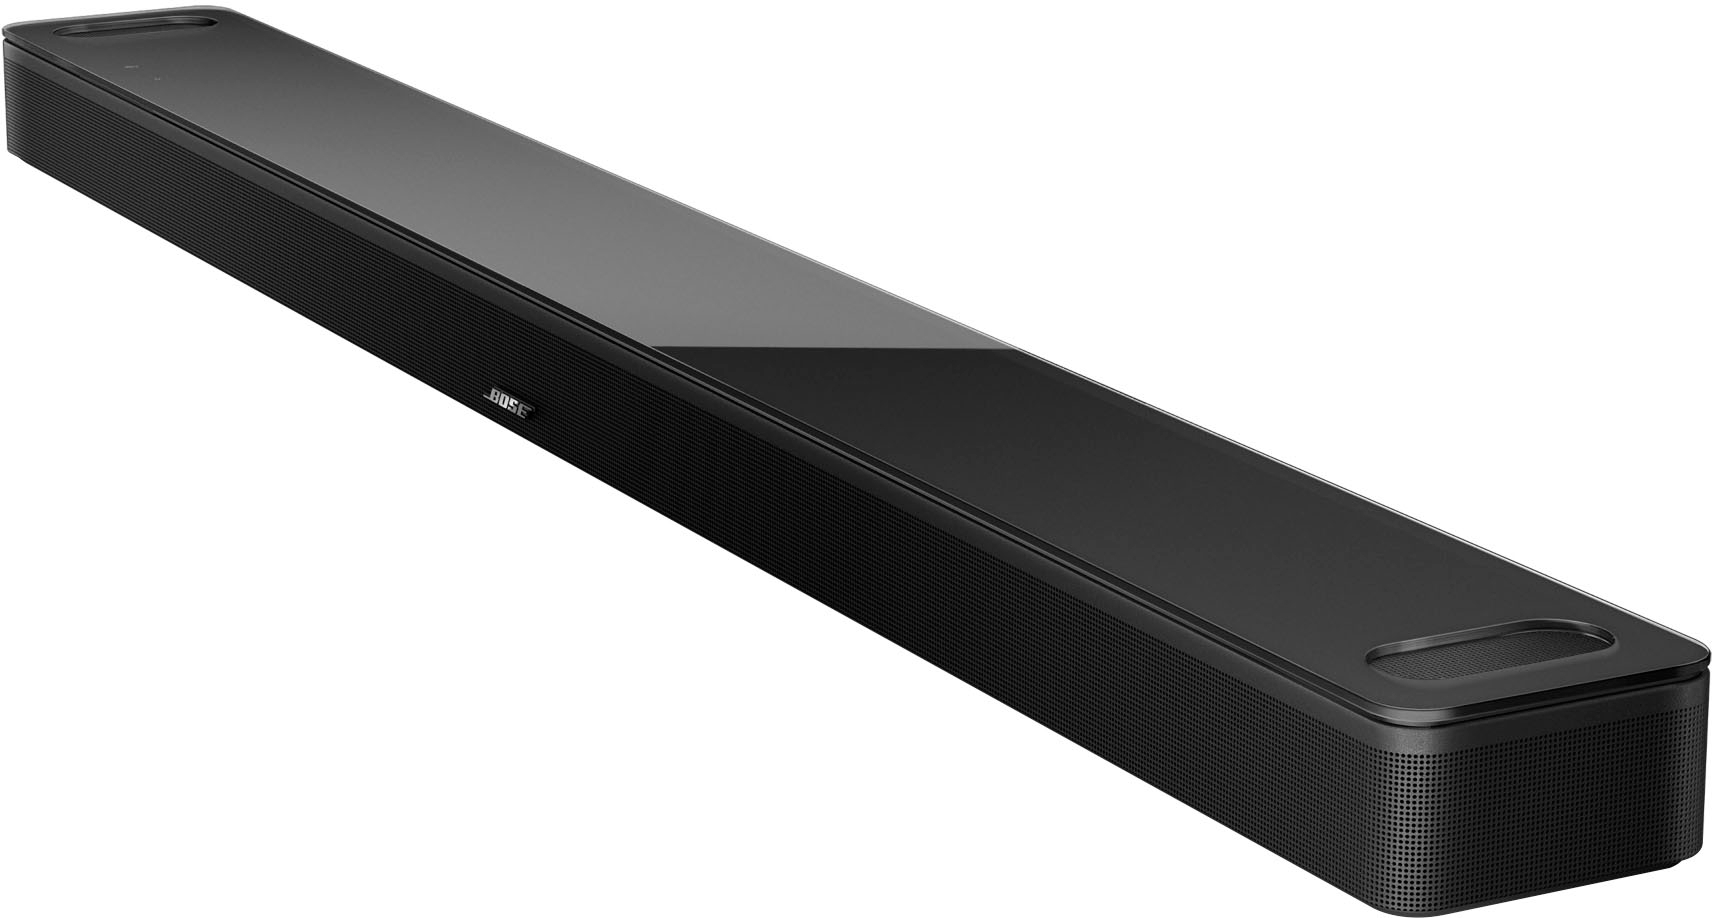 Angle View: Bose - Smart Ultra Soundbar with Dolby Atmos and Voice Assistant - Black